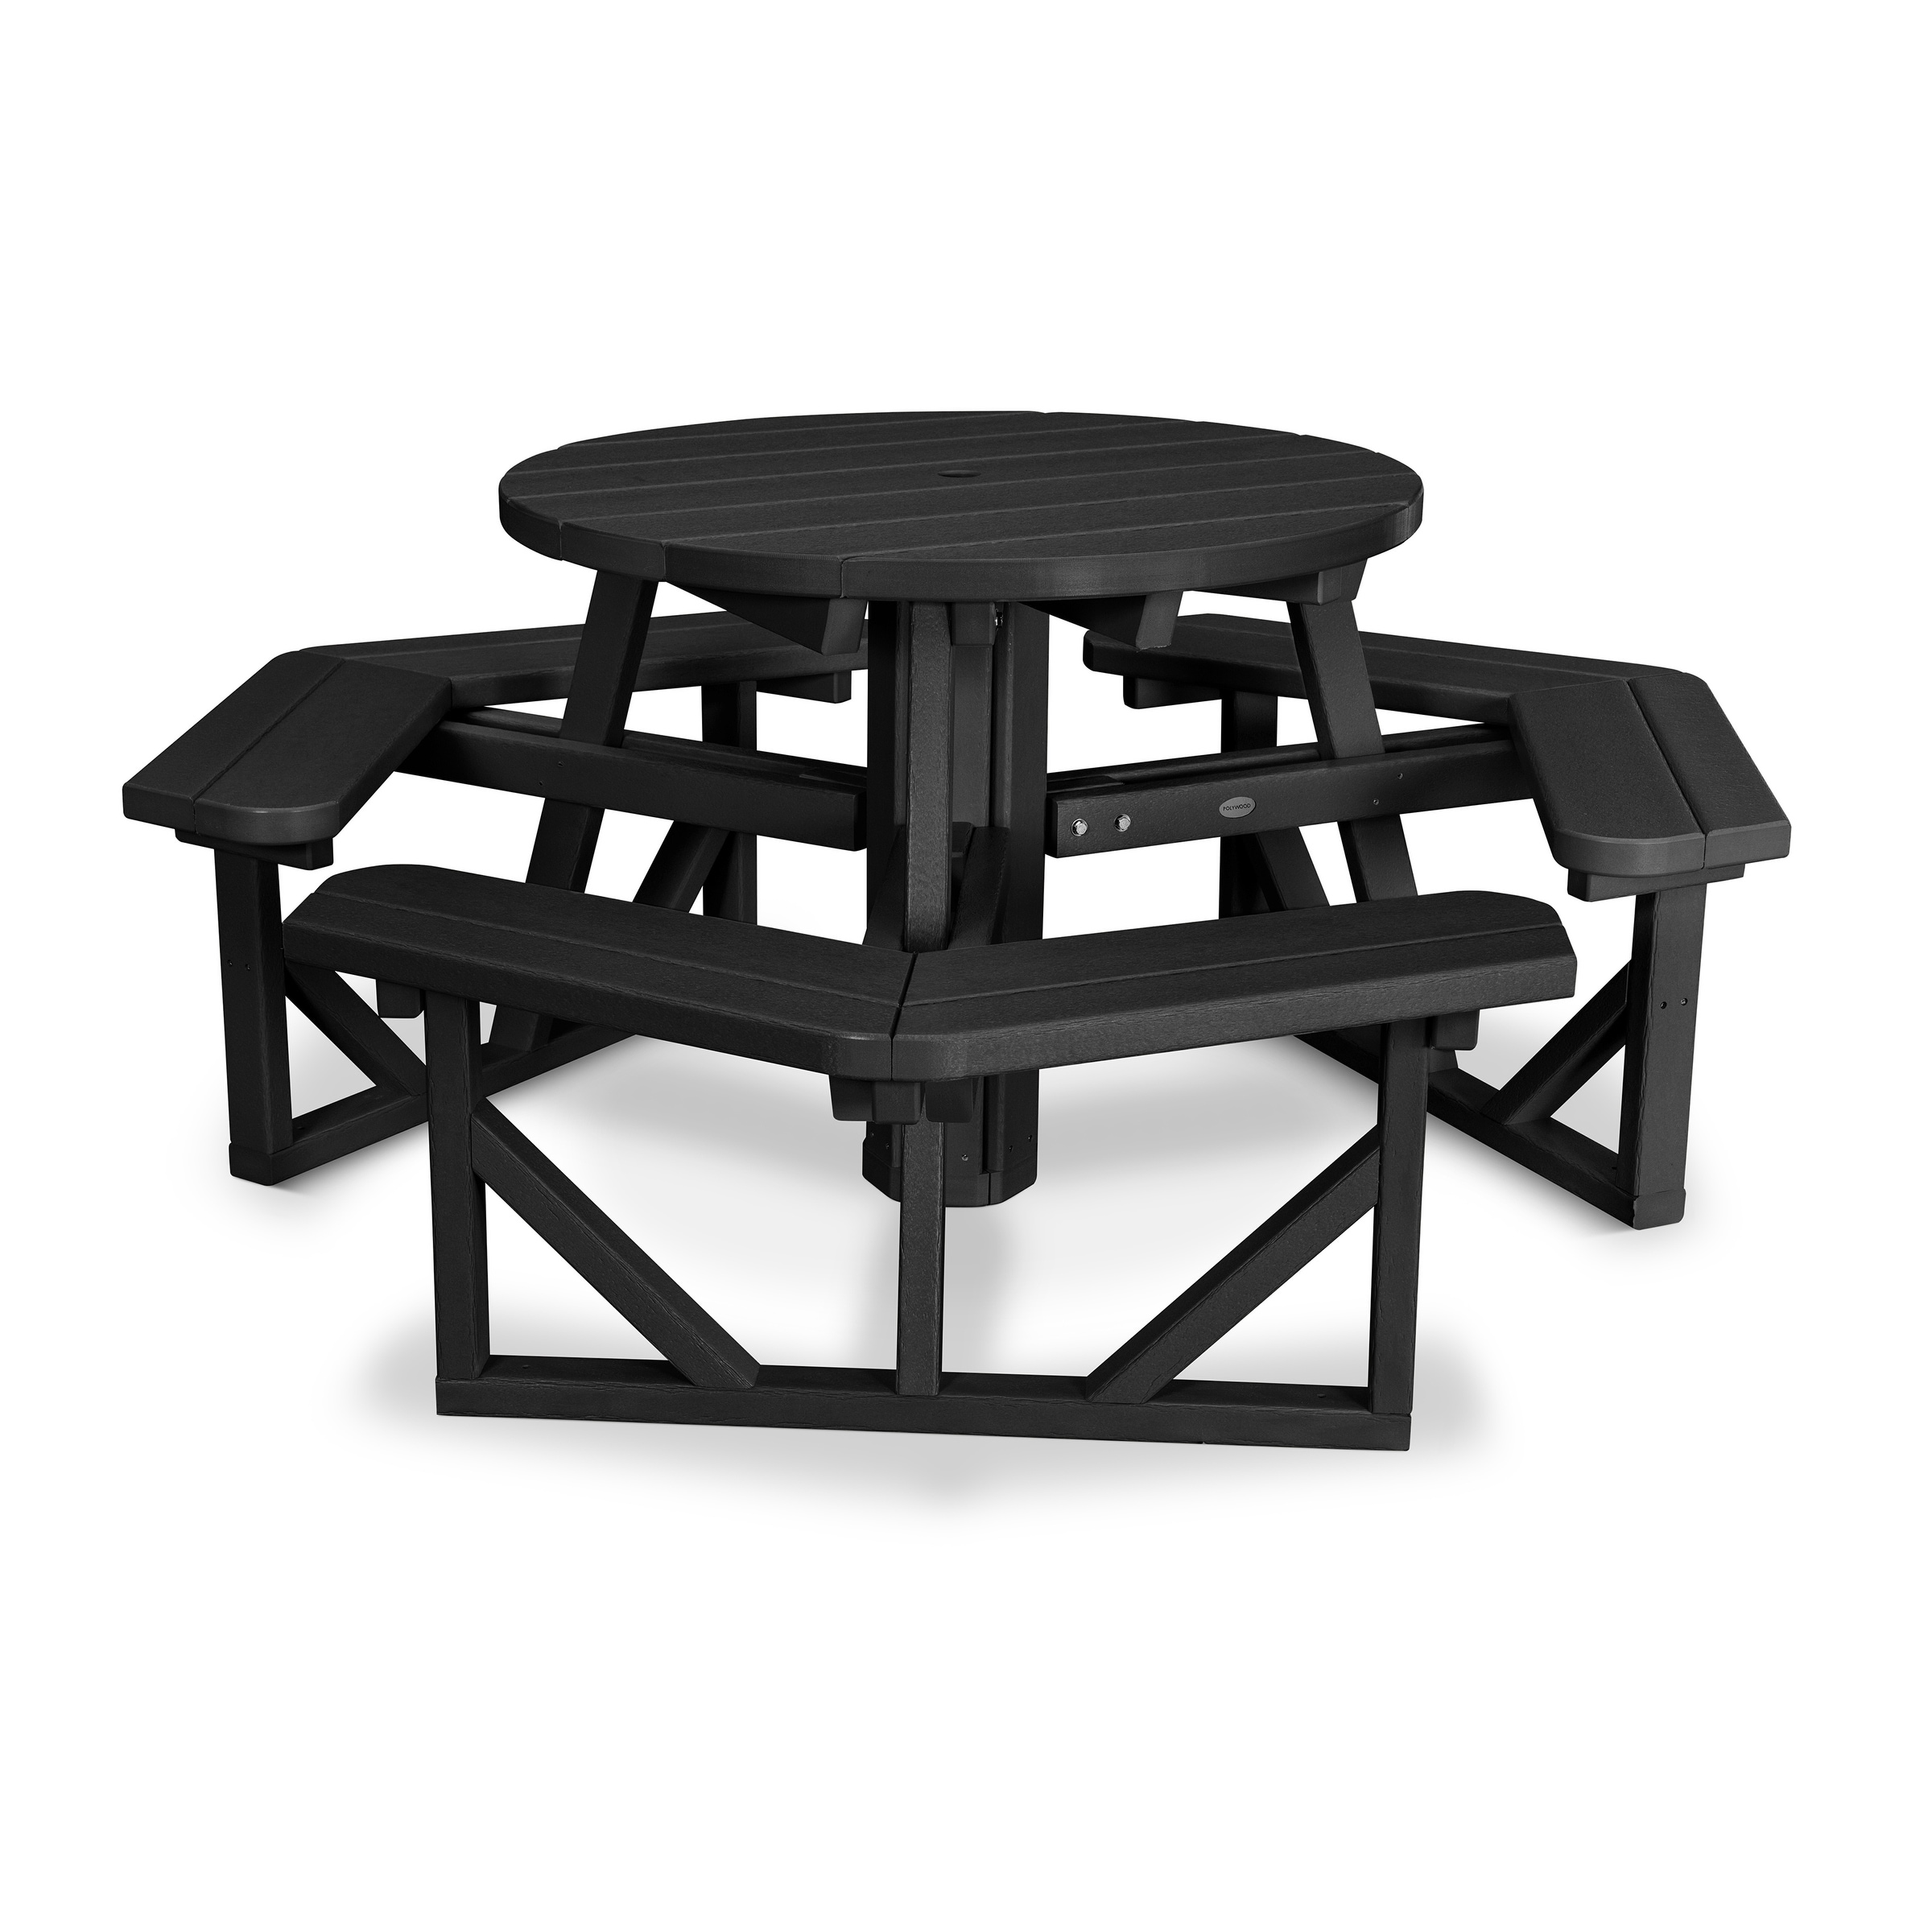 Polywood Park 36 Round Picnic Table